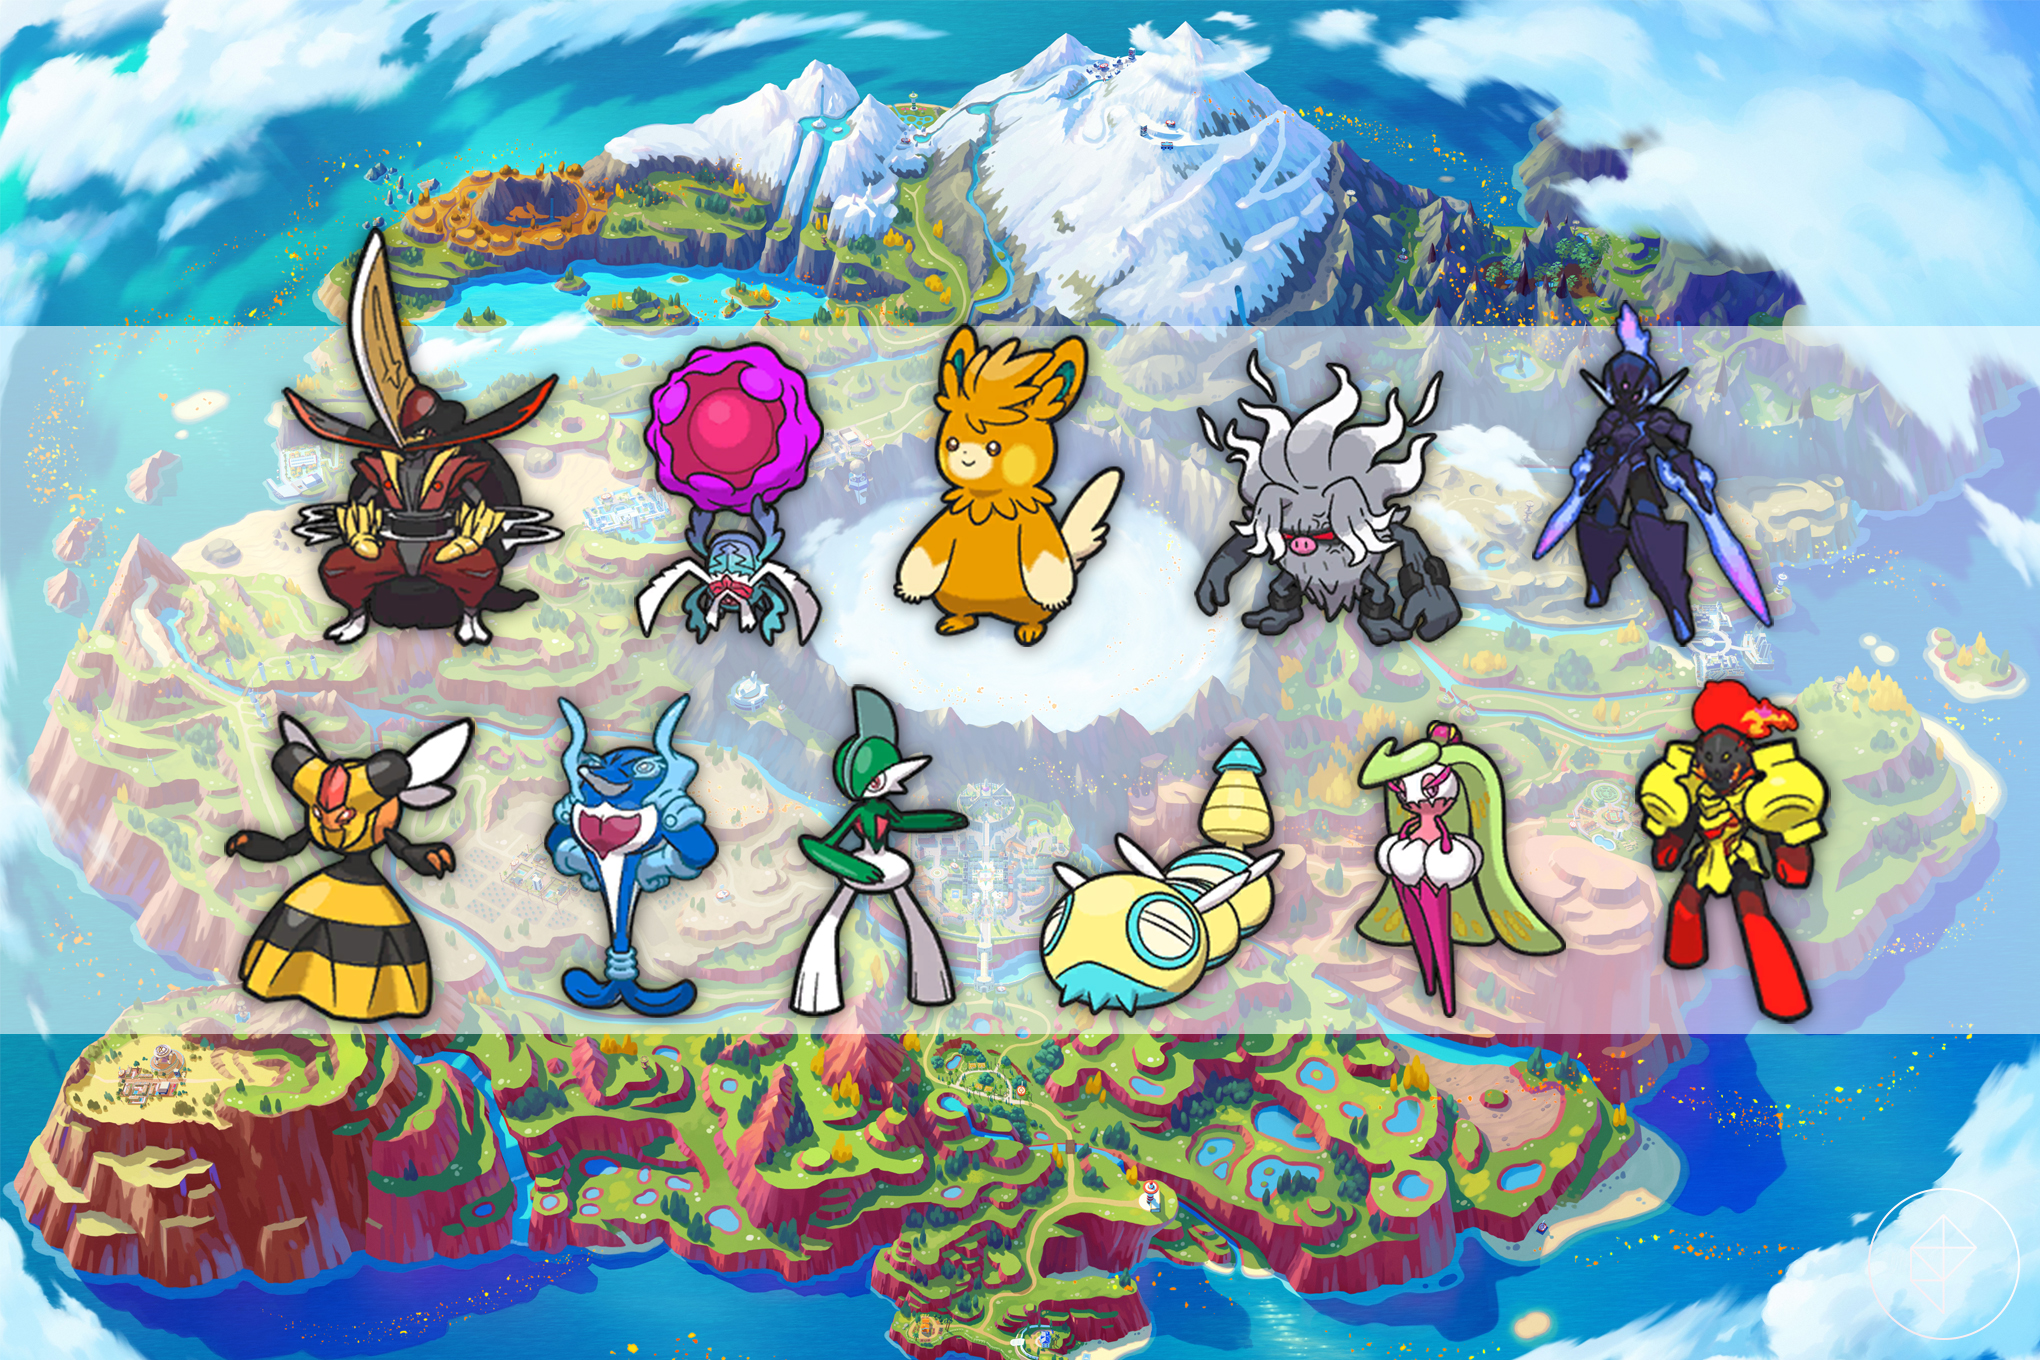 A graphic of 11 Pokémon that have special evolutions over a map of Paldea, including Pawmot, Tsareena, Gallade, Dudunsparce, and others